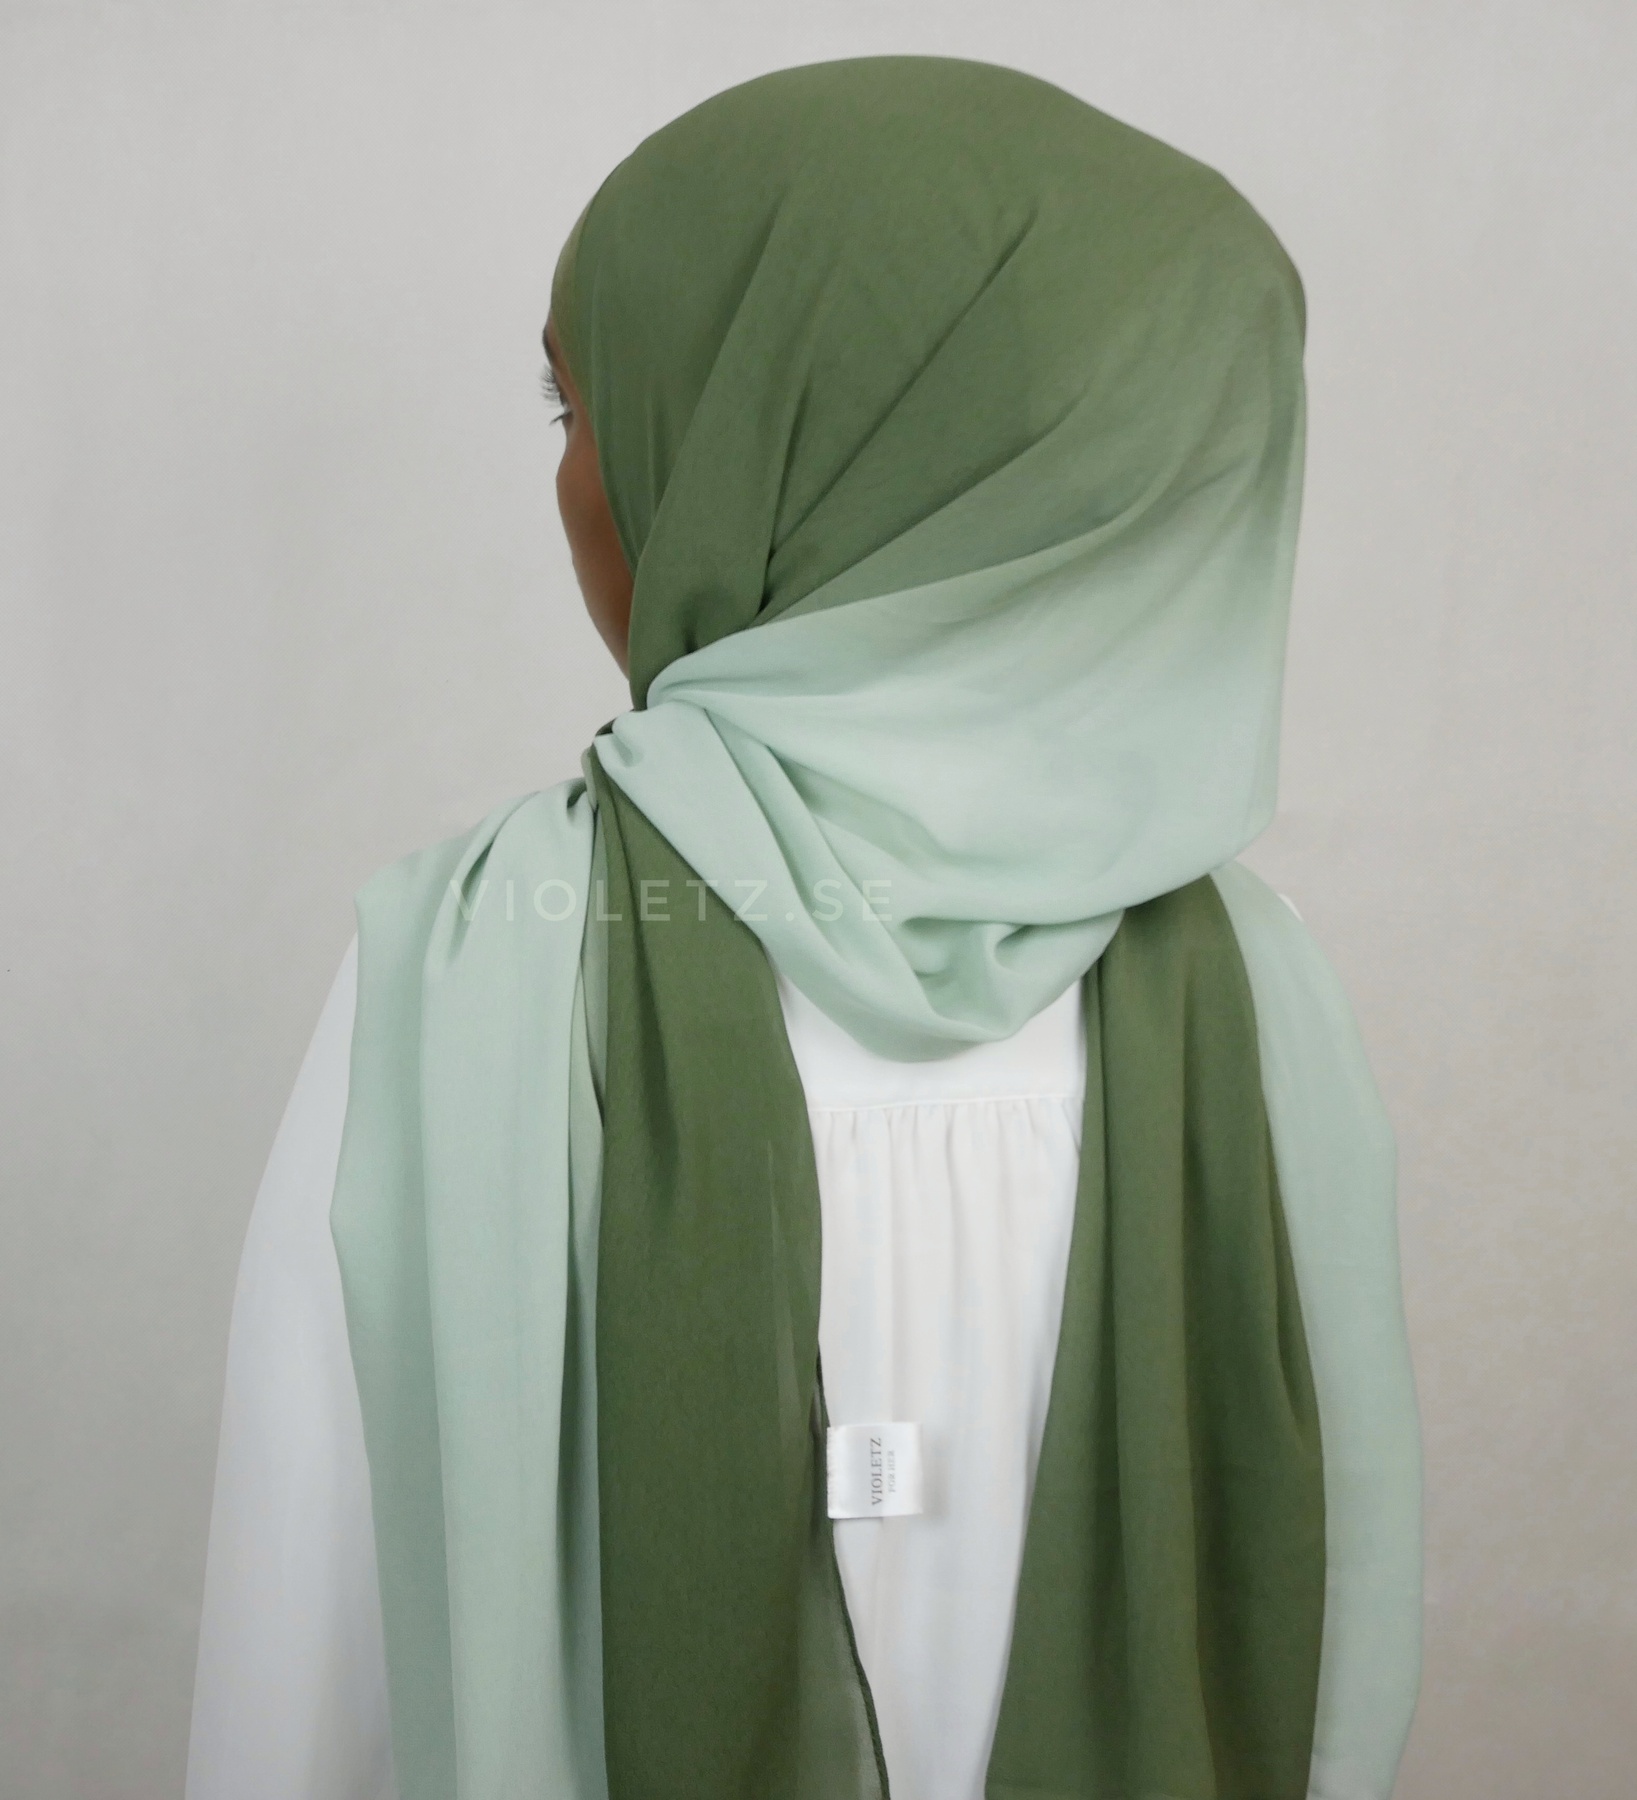 Instant Chiffong hijab med undersjal - ombré oliv